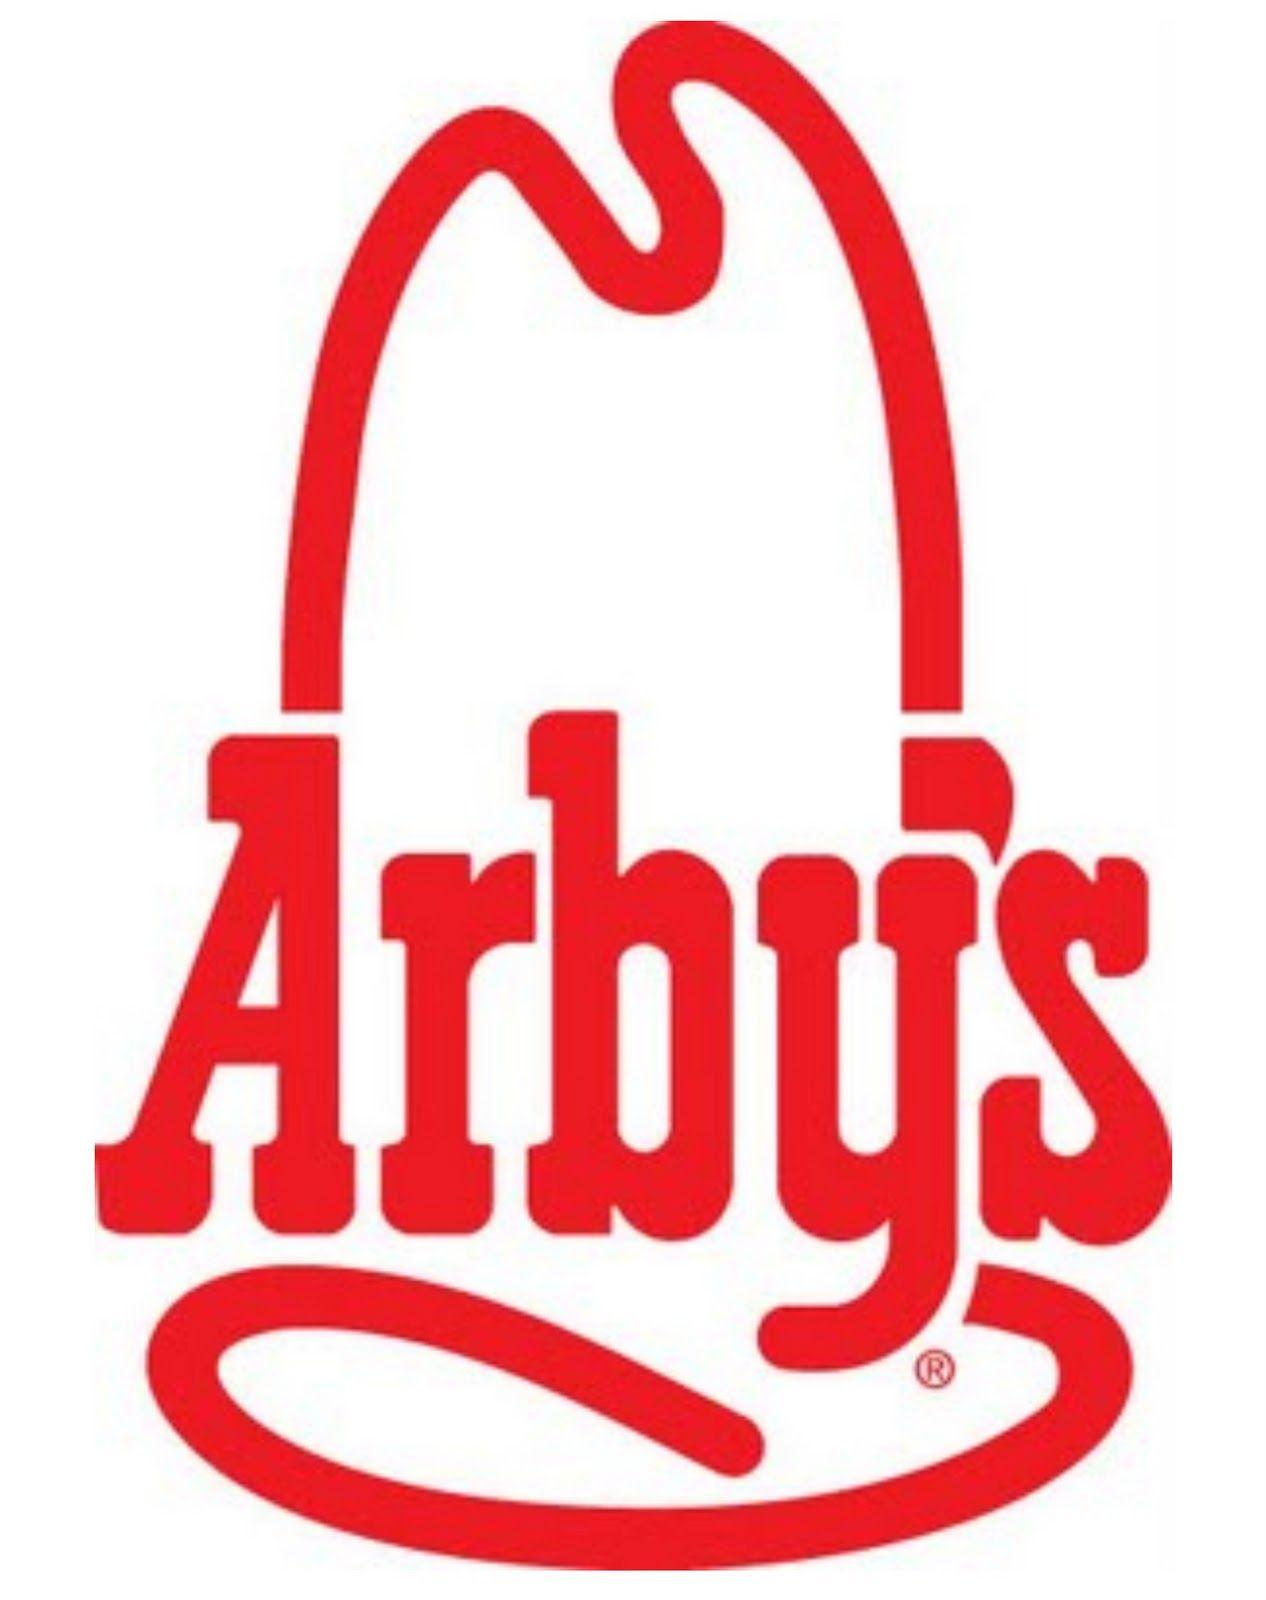 Inappropriate Logo - Subliminal Message Photo: Arby's Logo Subliminal Message